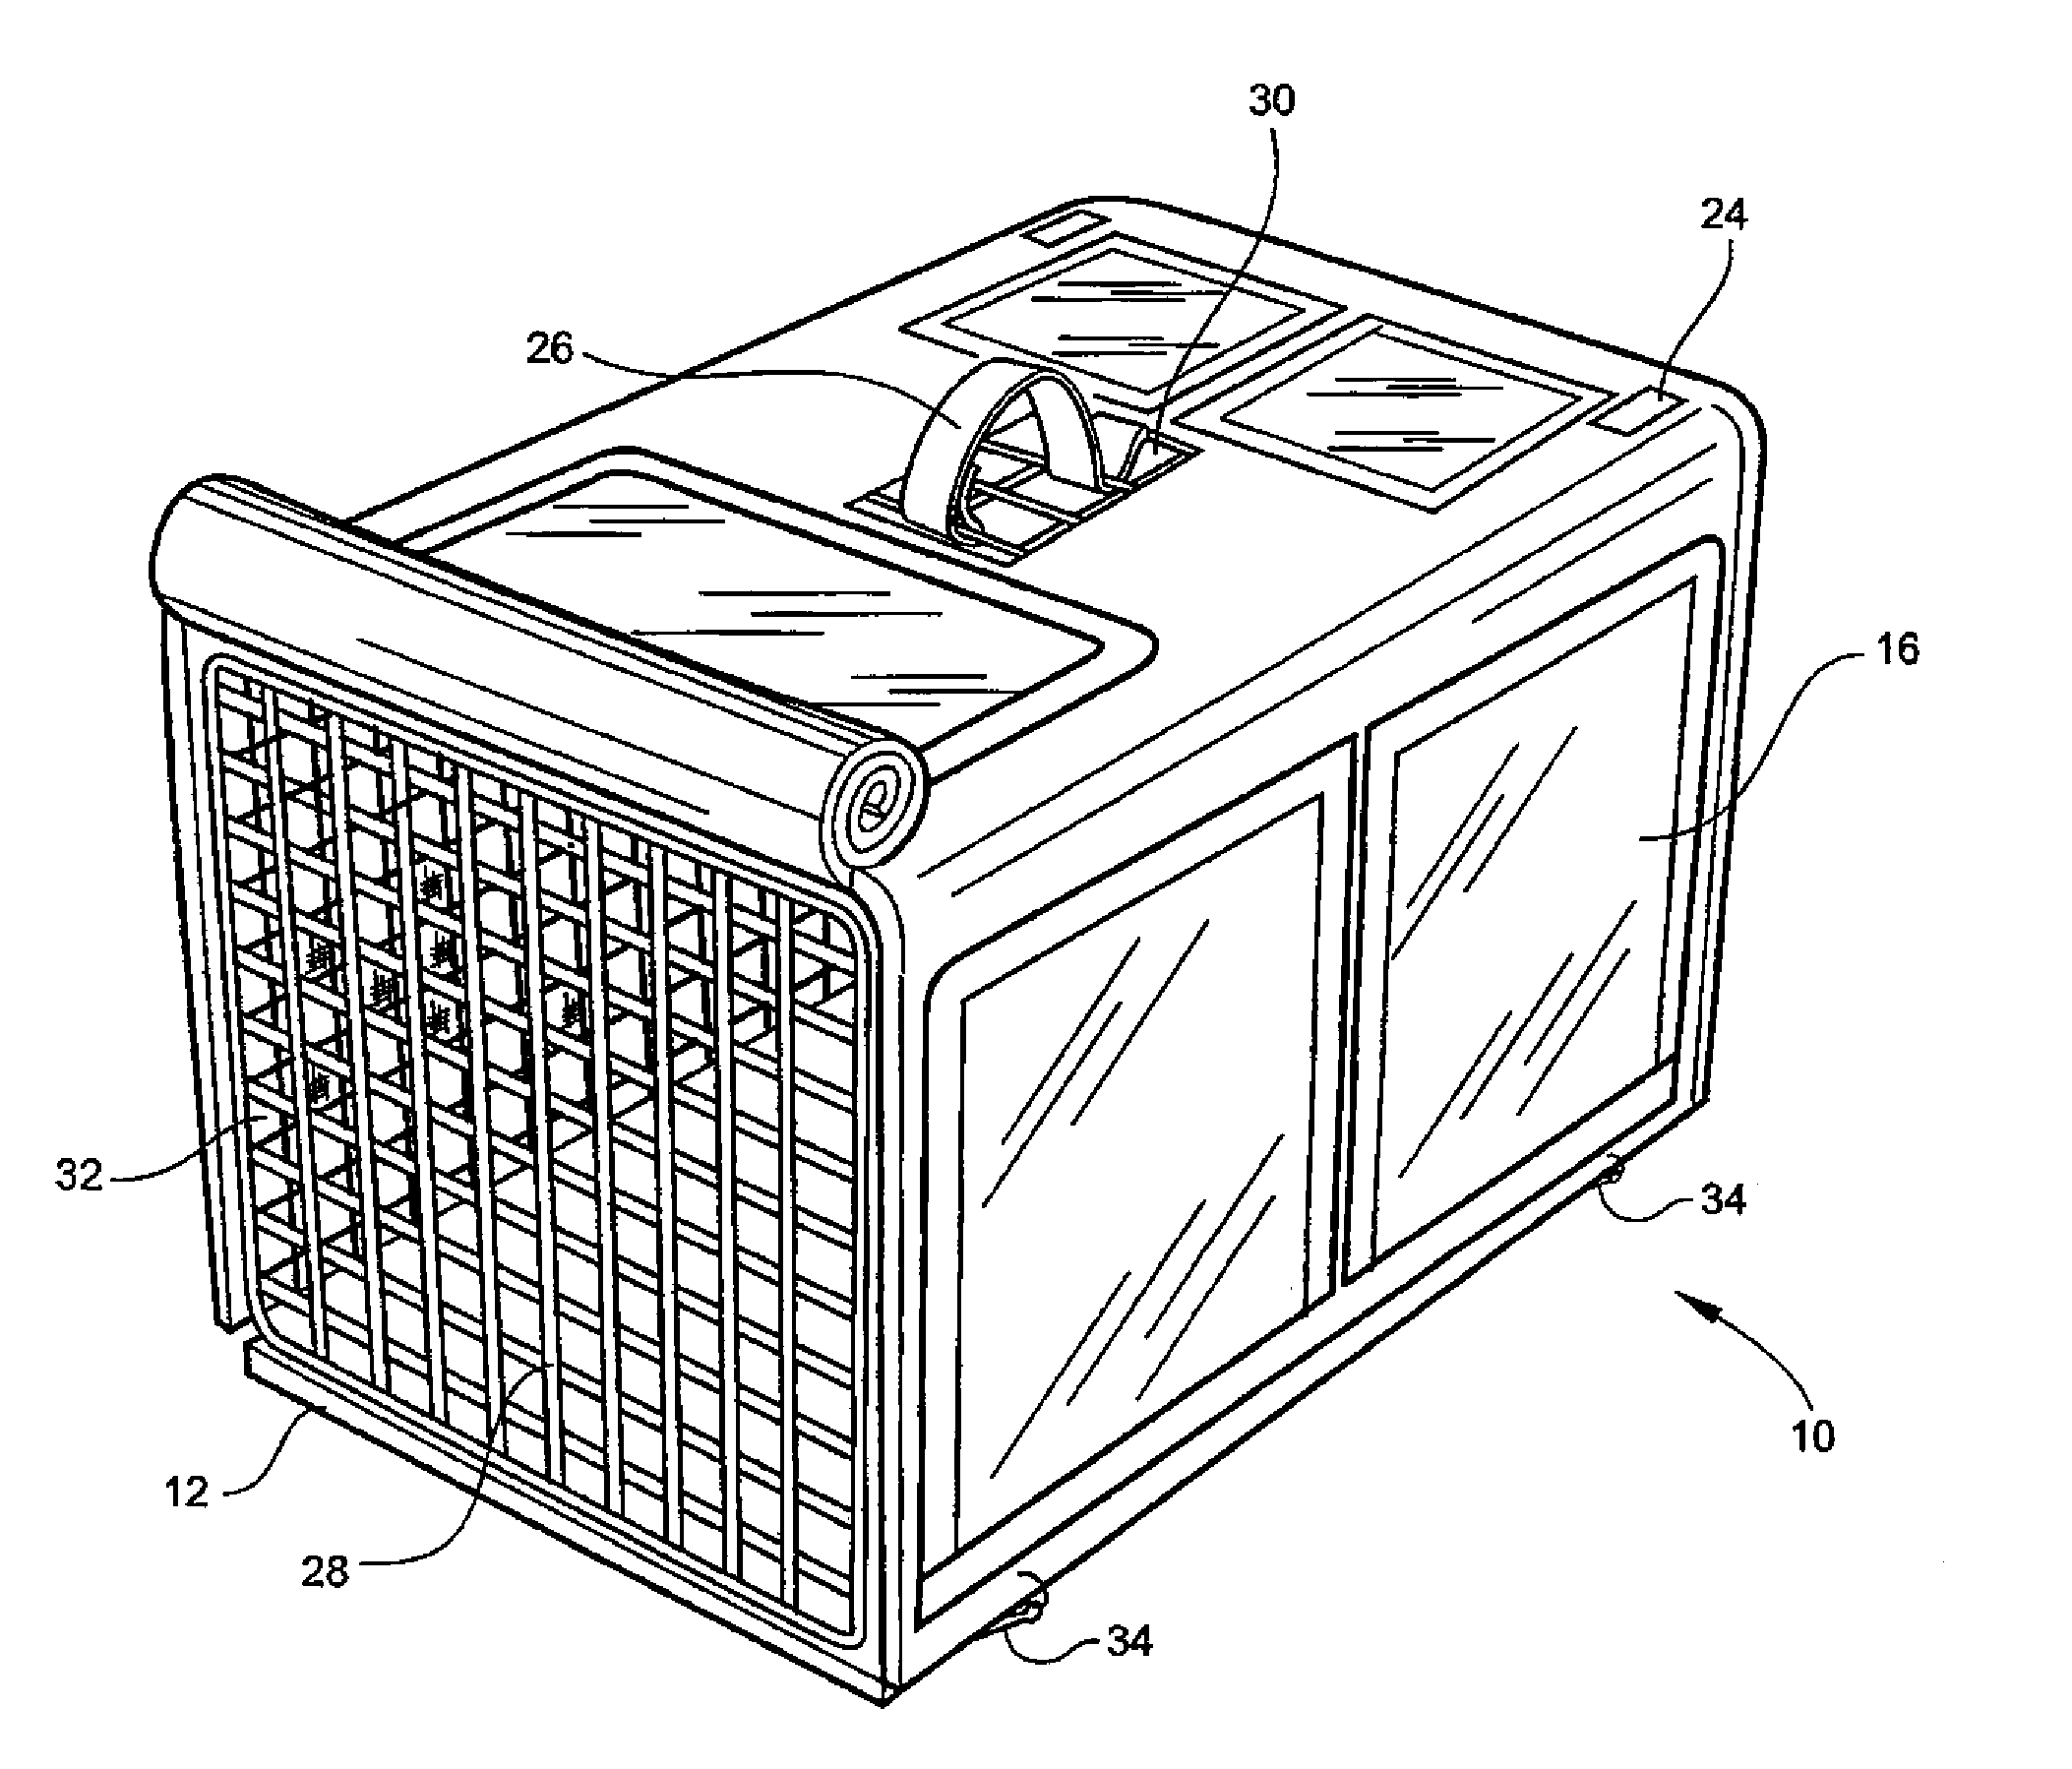 Cover for a pet carrier